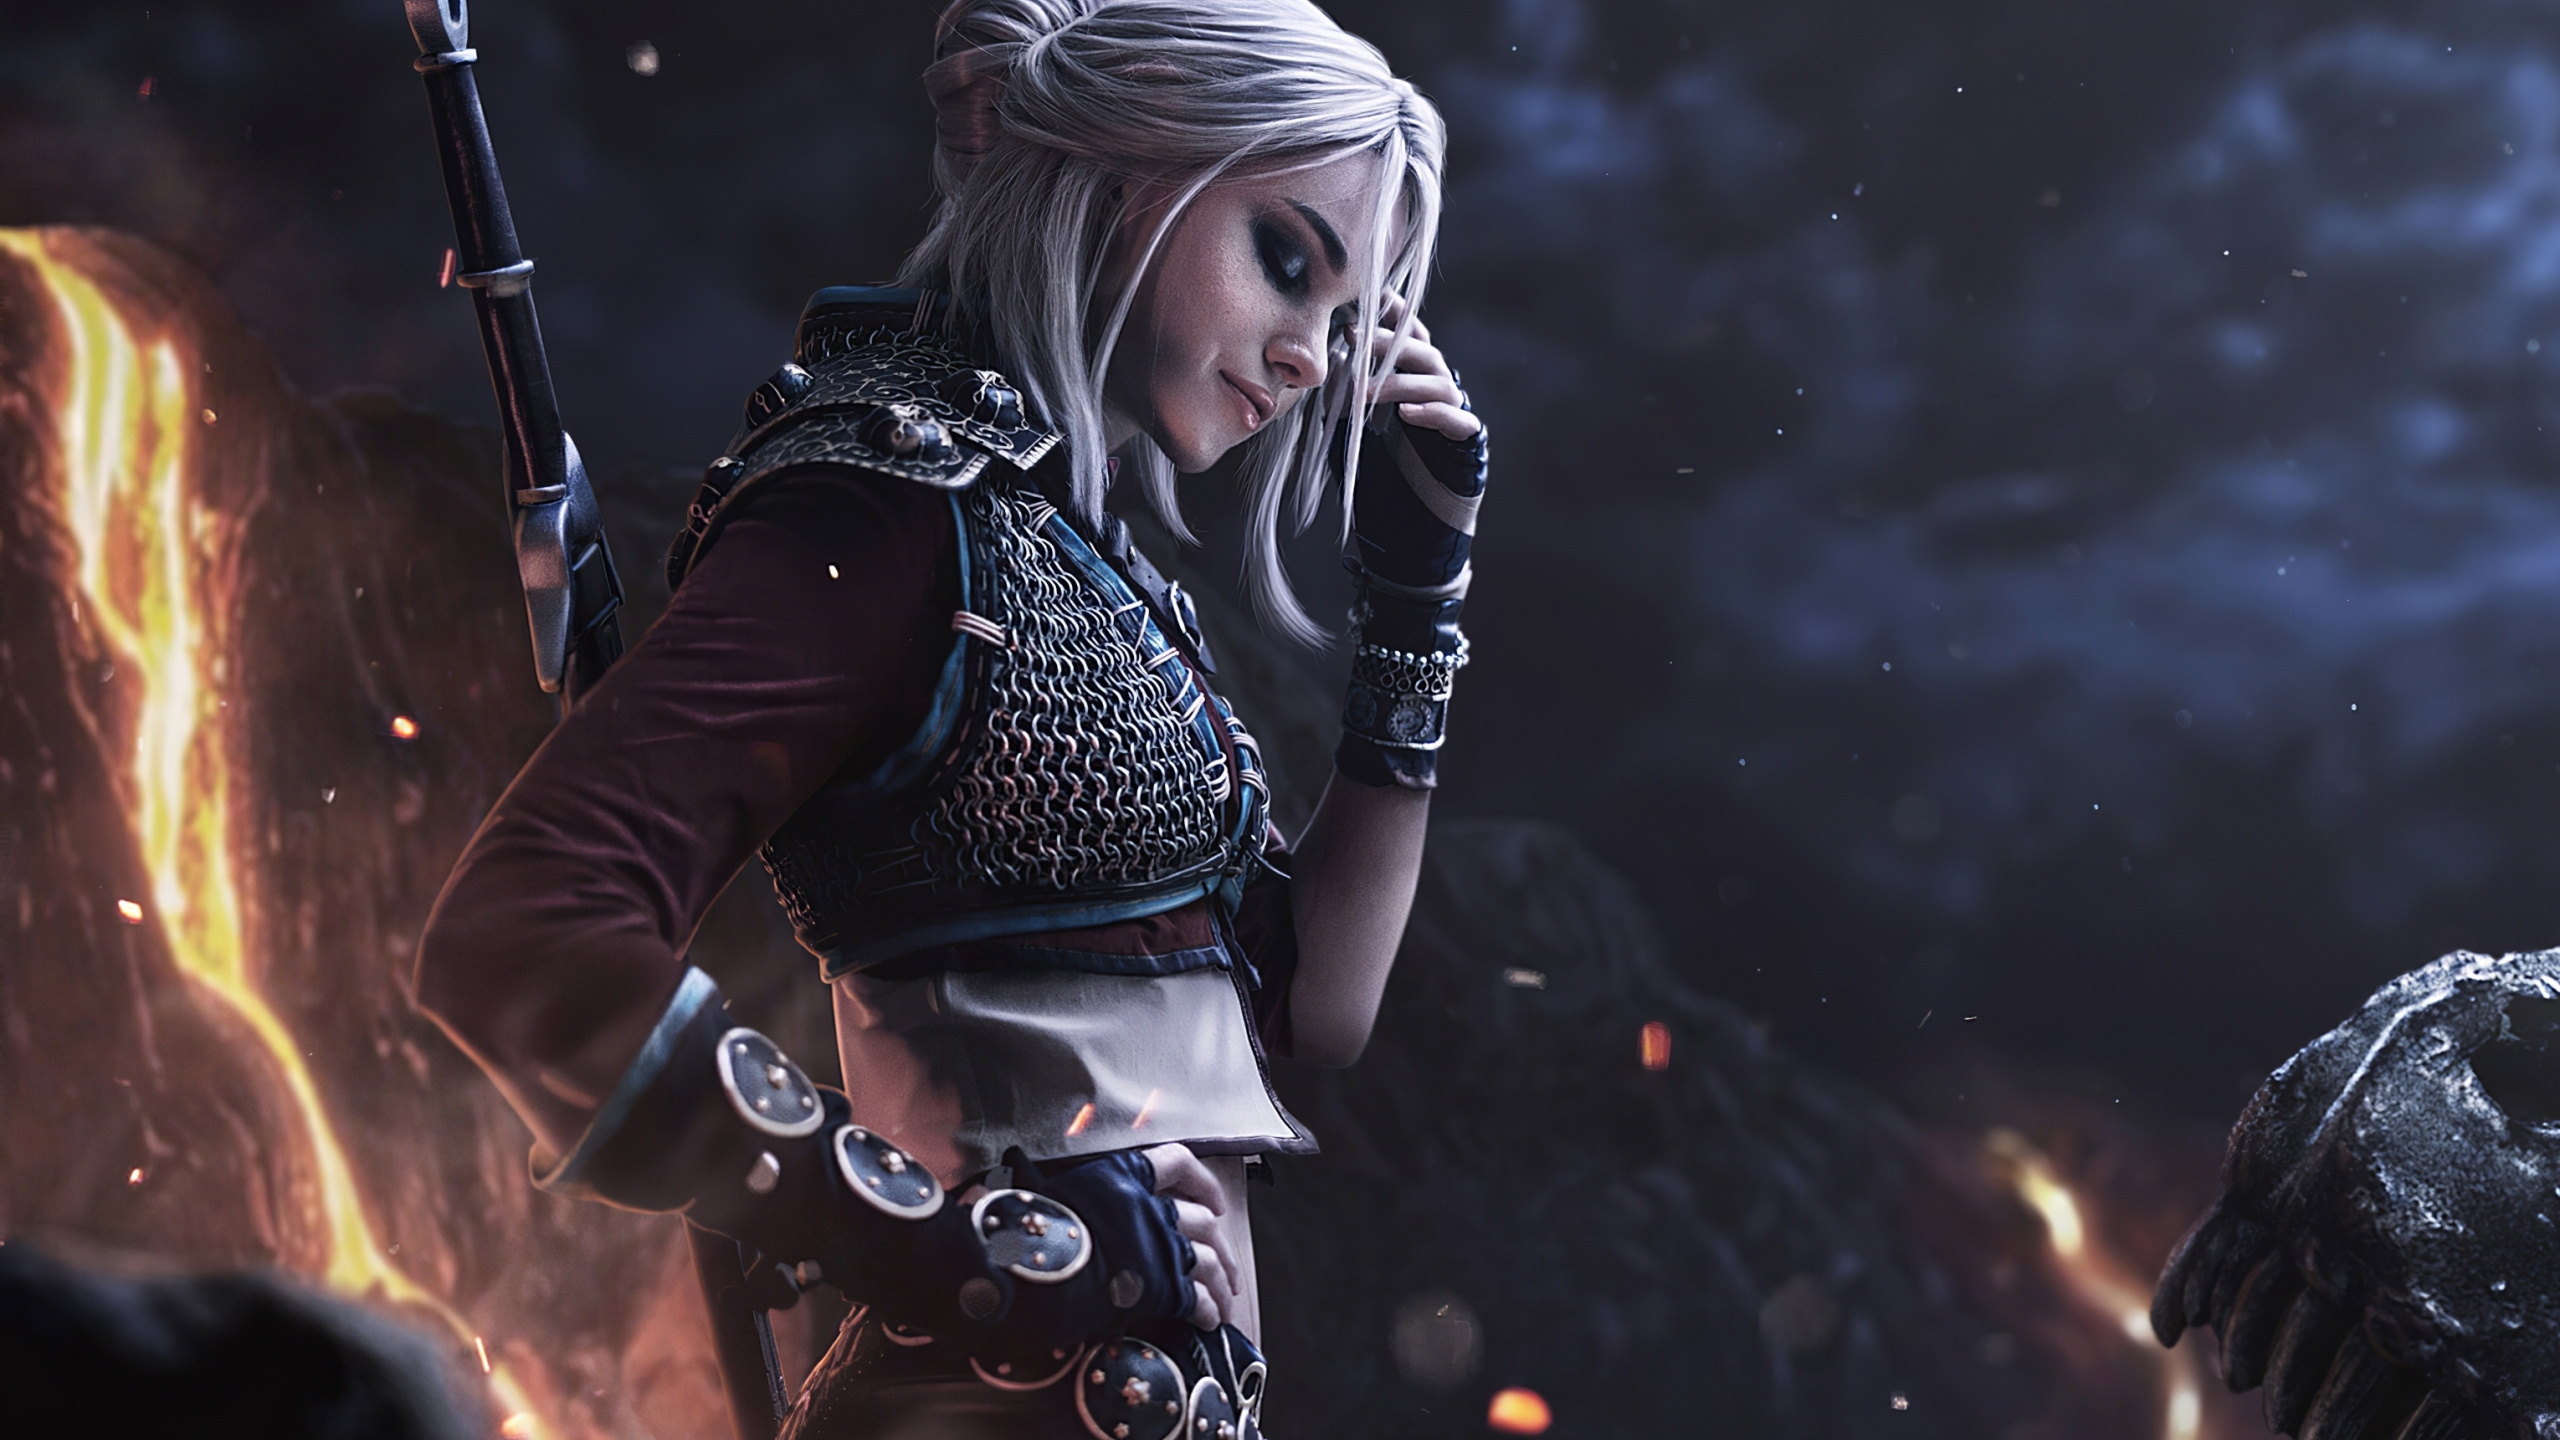 Download 2560x1440 Wallpaper Warrior Ciri The Witcher Video Game Dual Wide Widescreen 16 9 Widescreen 2560x1440 Hd Image Background